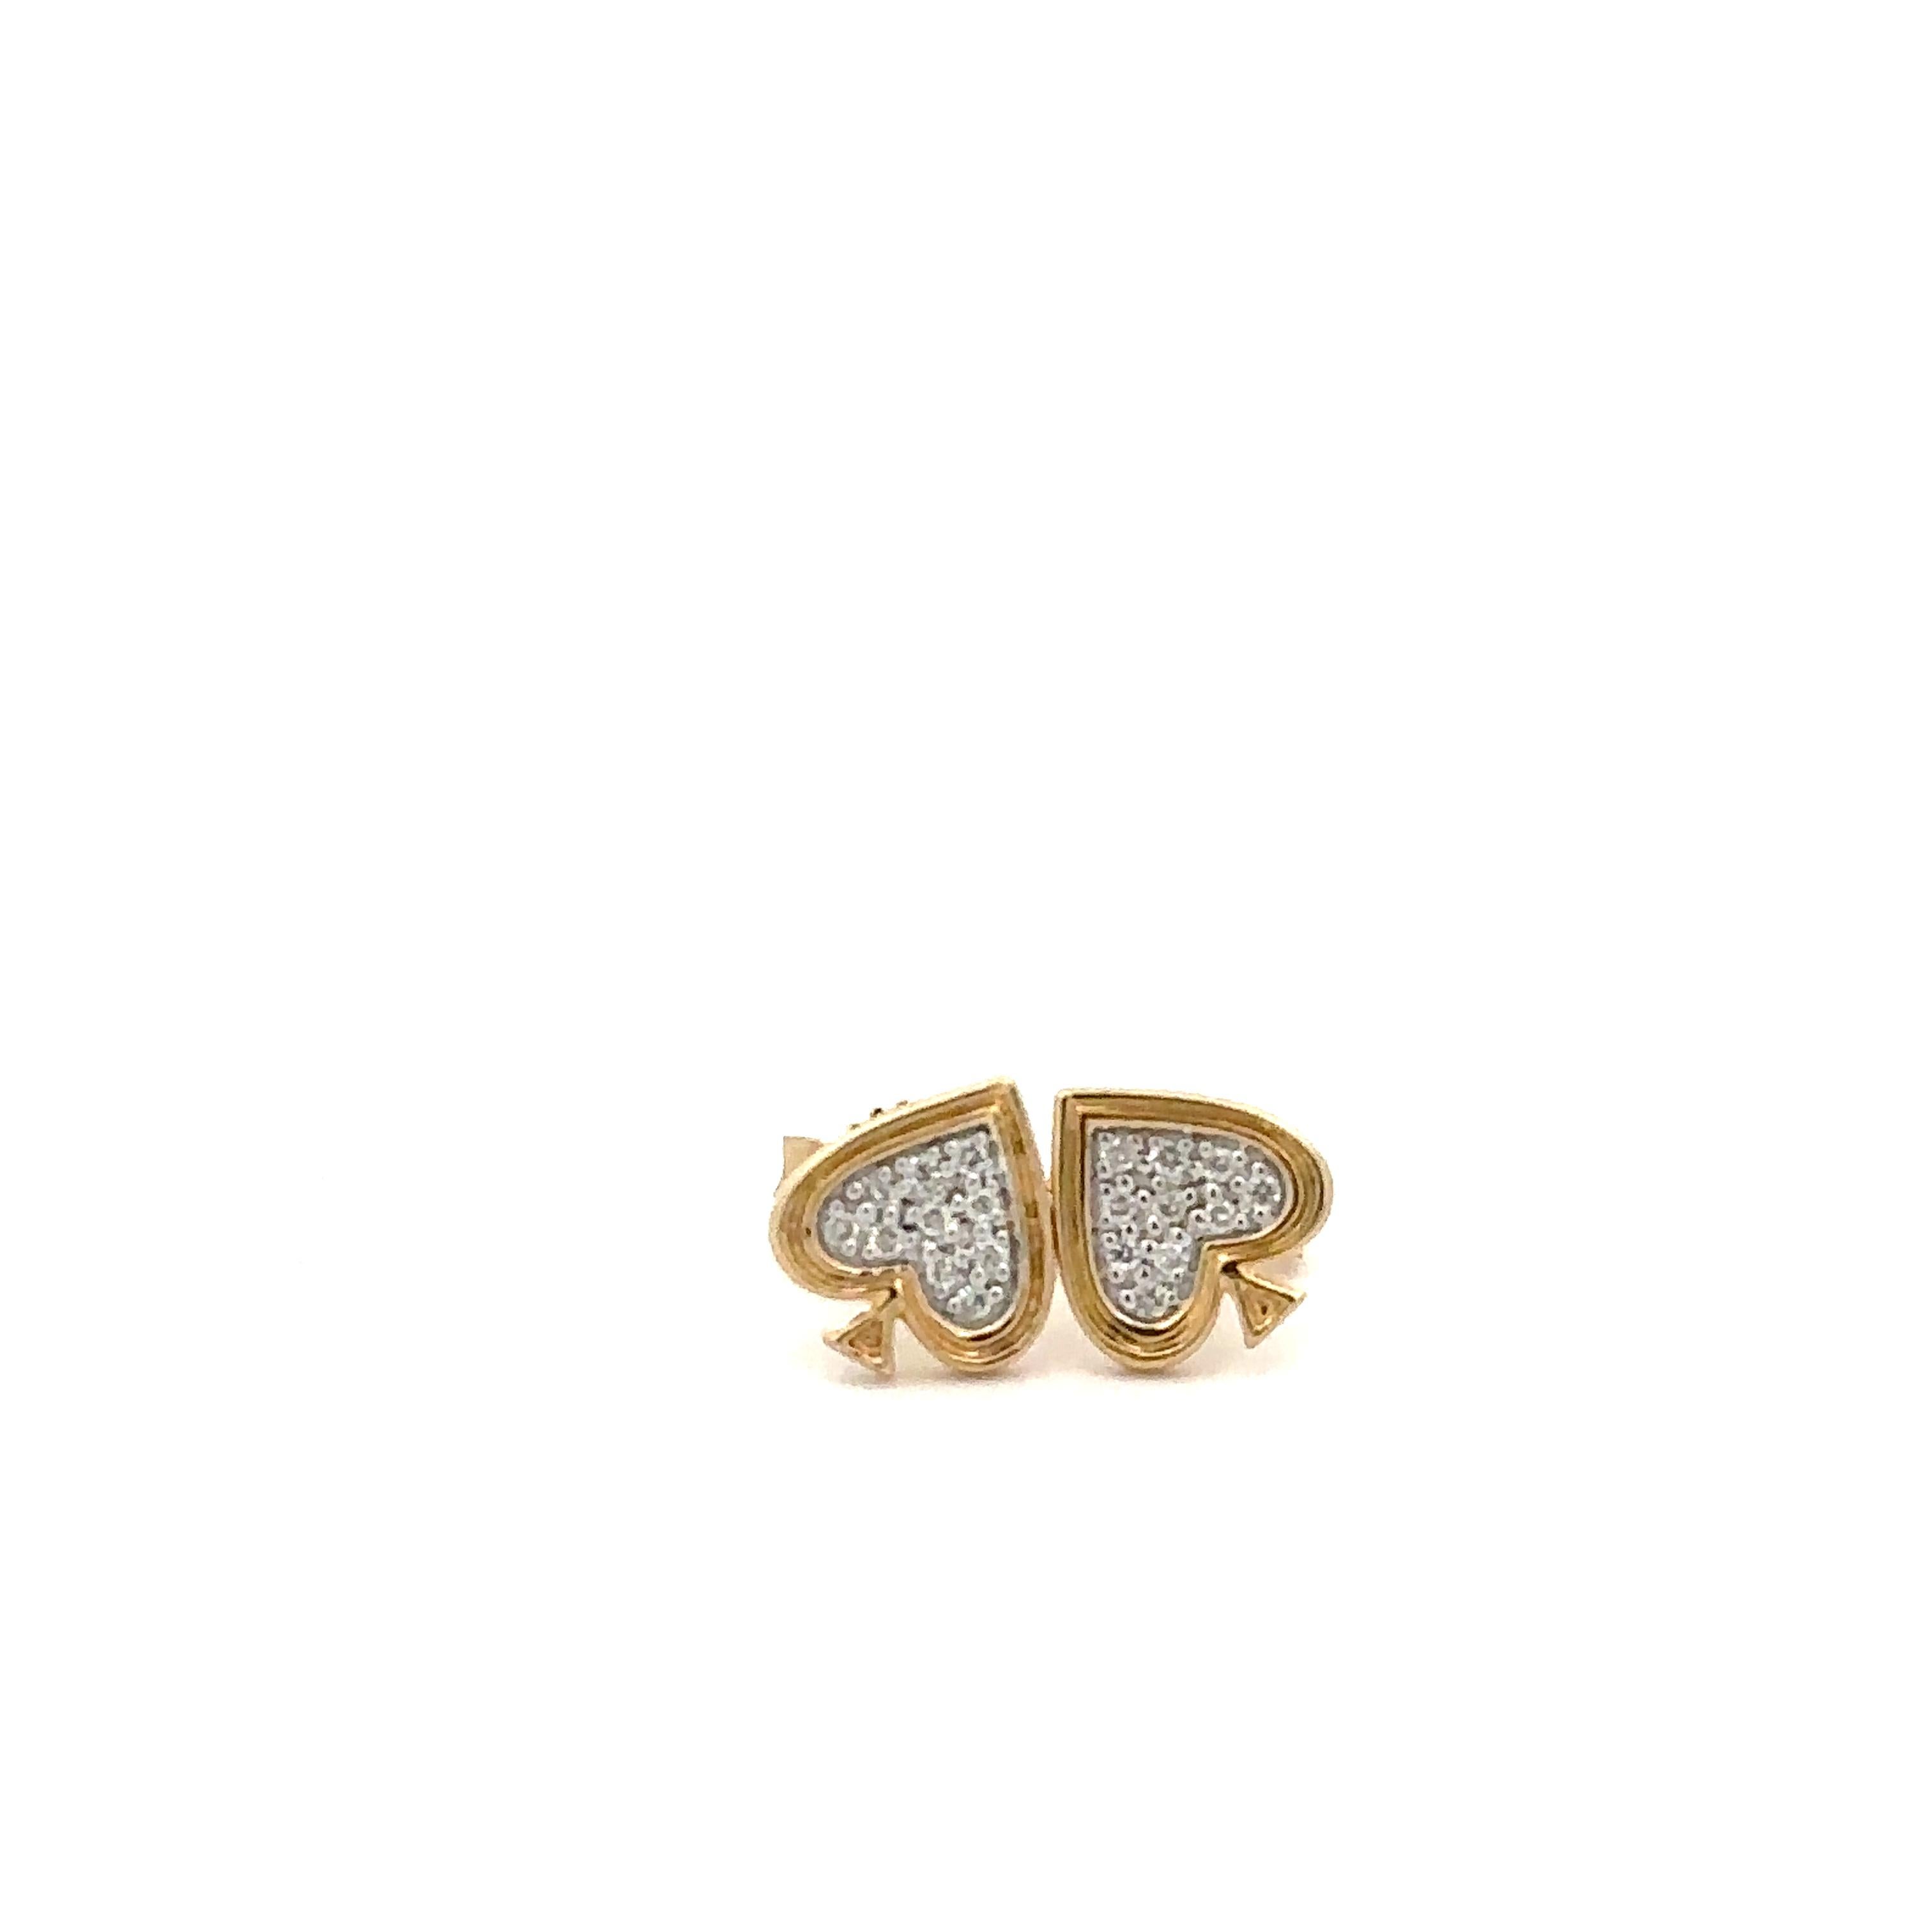 Adina Reyter One of a Kind Large Pave Spade Posts - Y14

14k yellow gold pave diamond spade posts. 

Measurements: 7 mm x 7 mm

Total Diamond Carat Weight: 0.08 CT